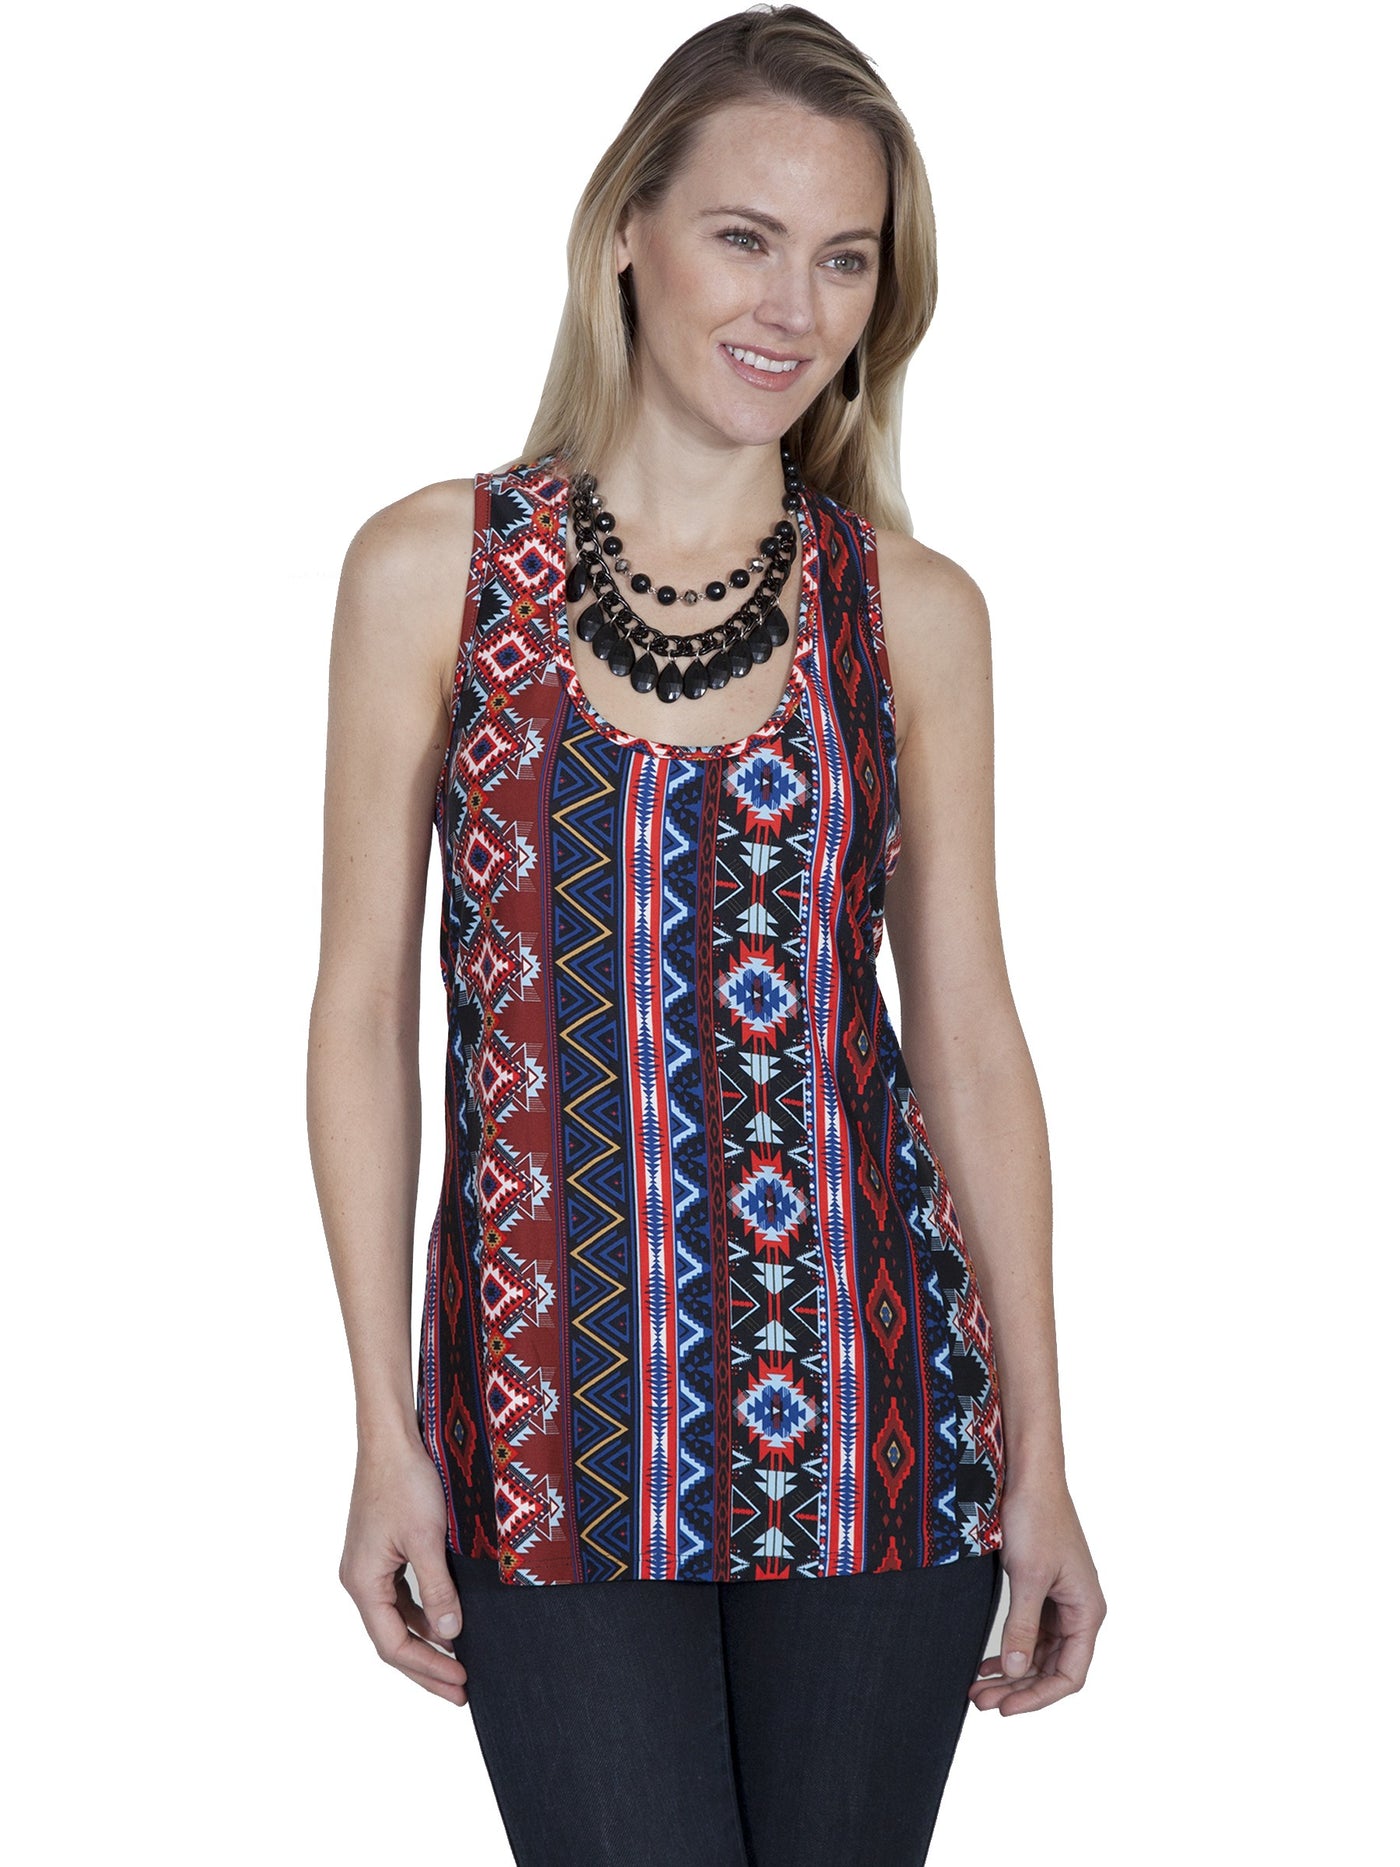 Ethnic Style Tank in Aztek - SOLD OUT